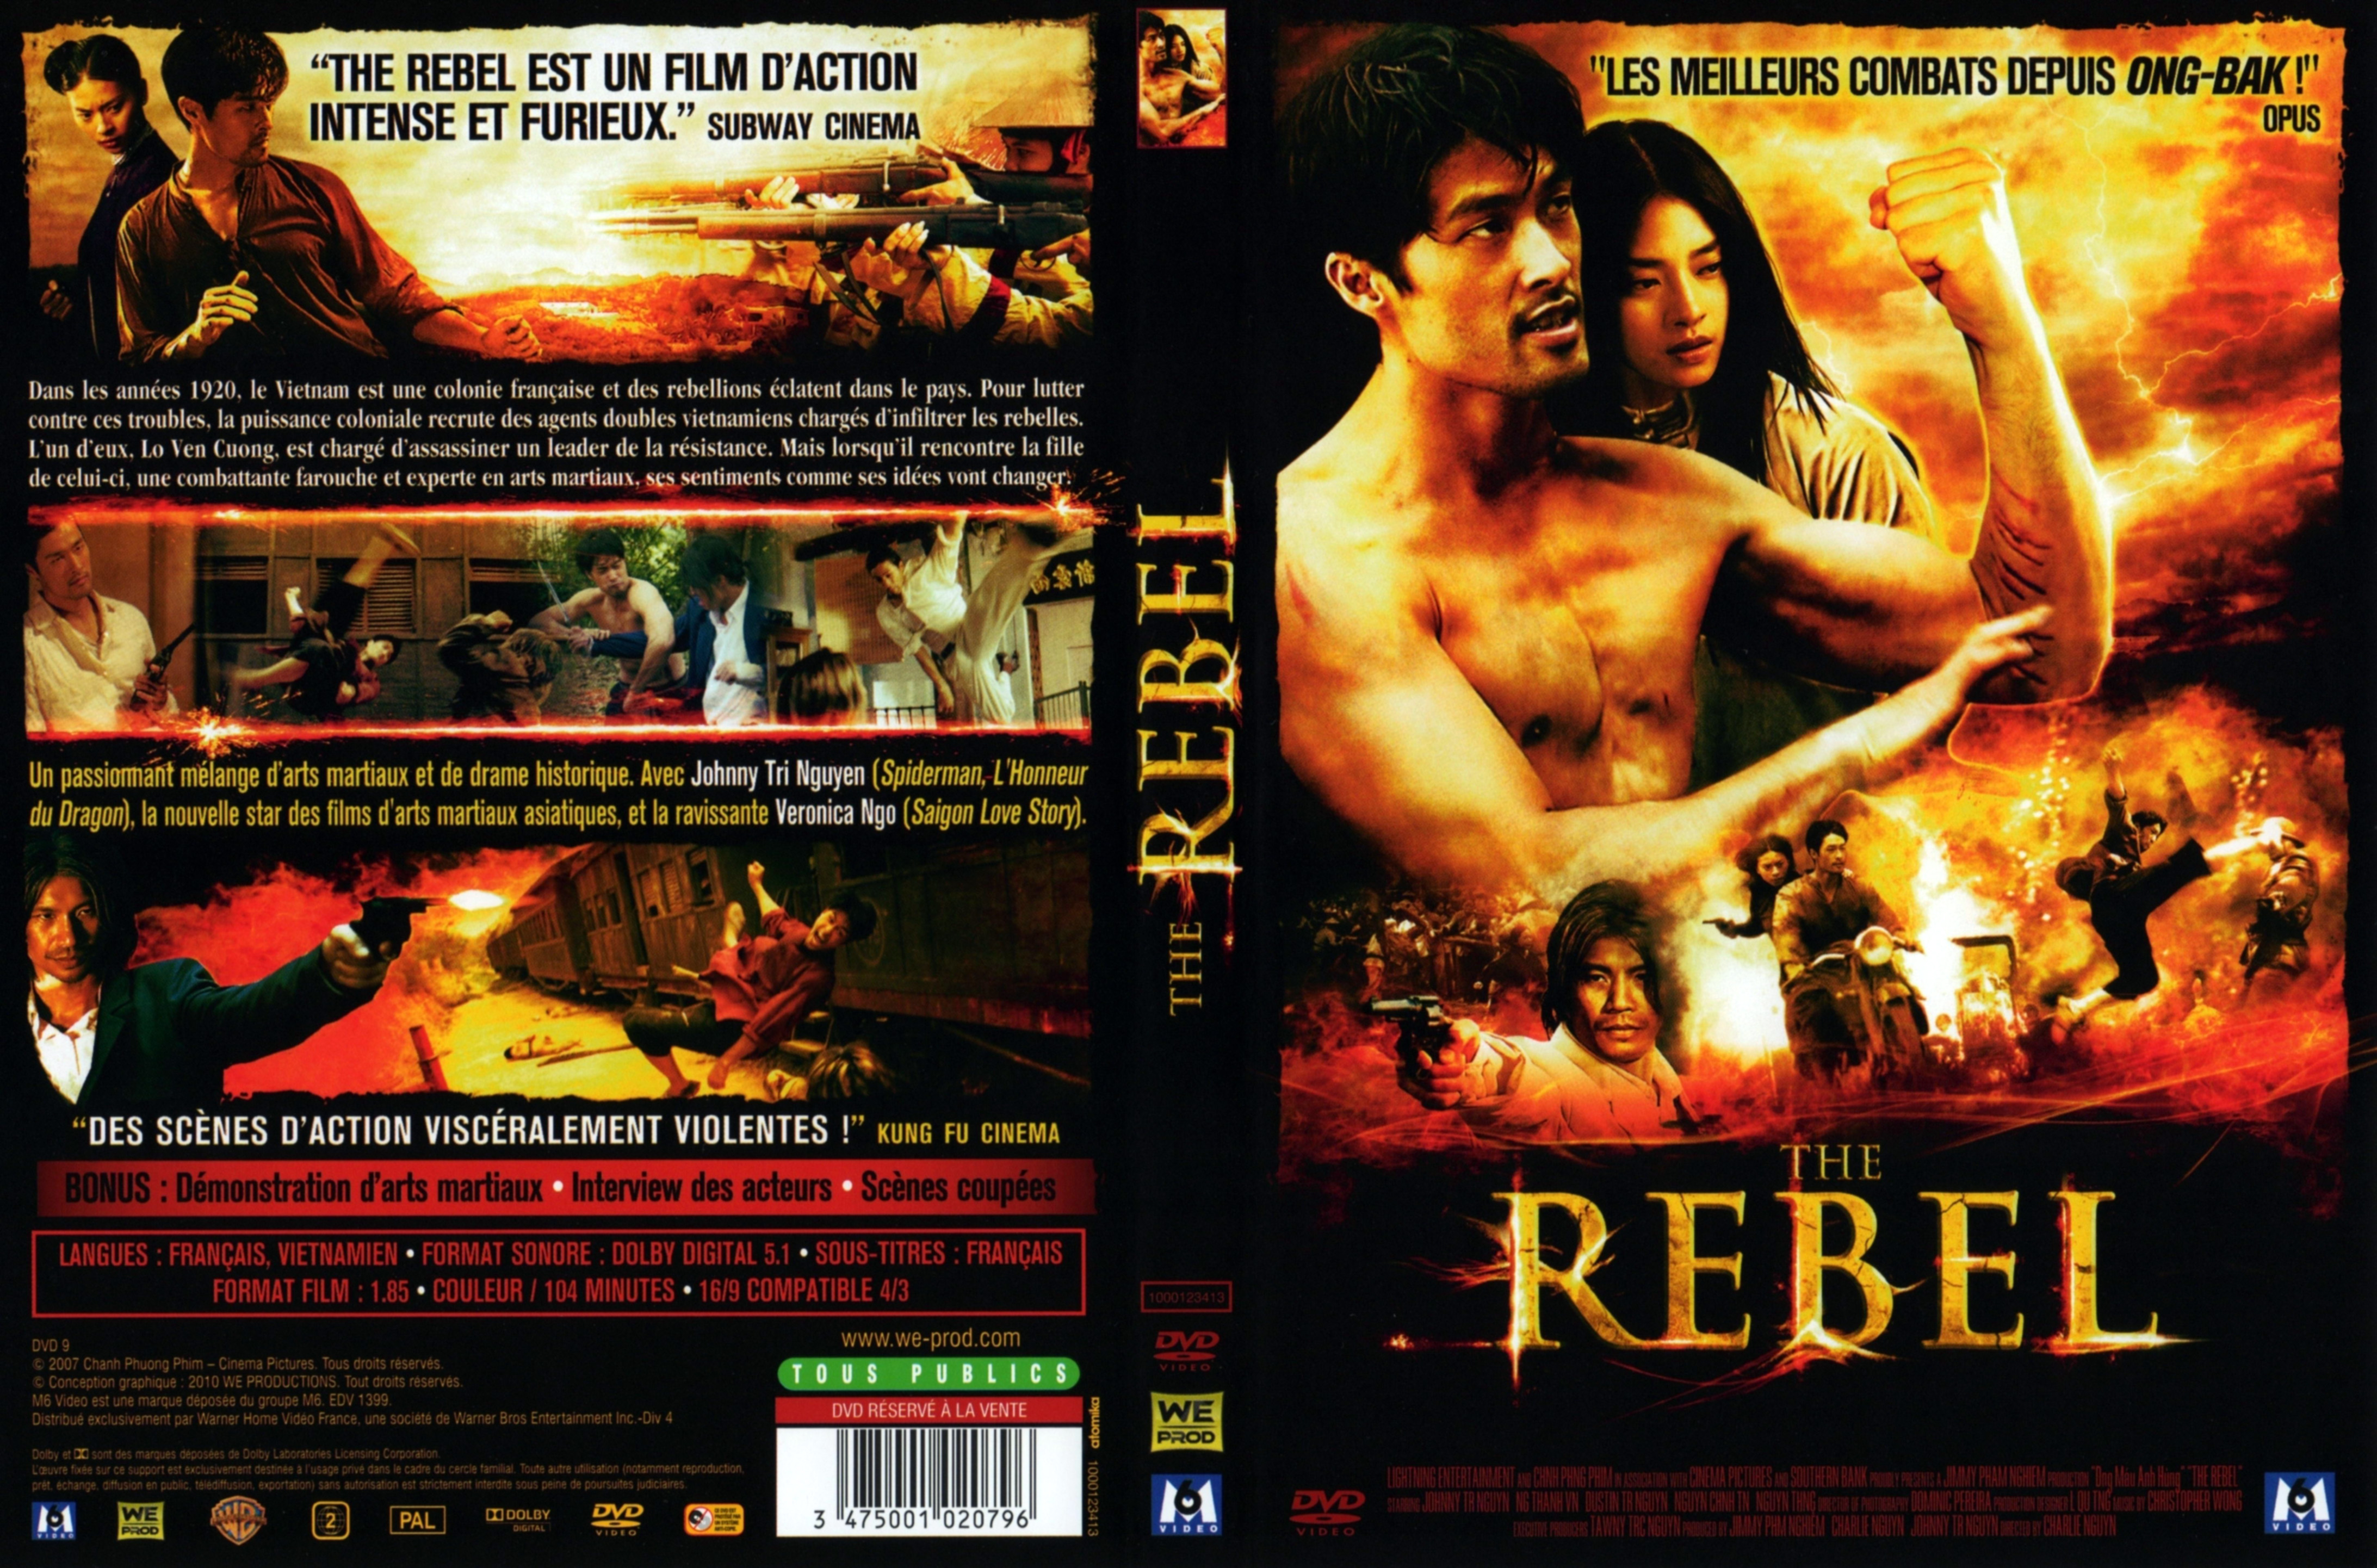 Jaquette DVD The rebel